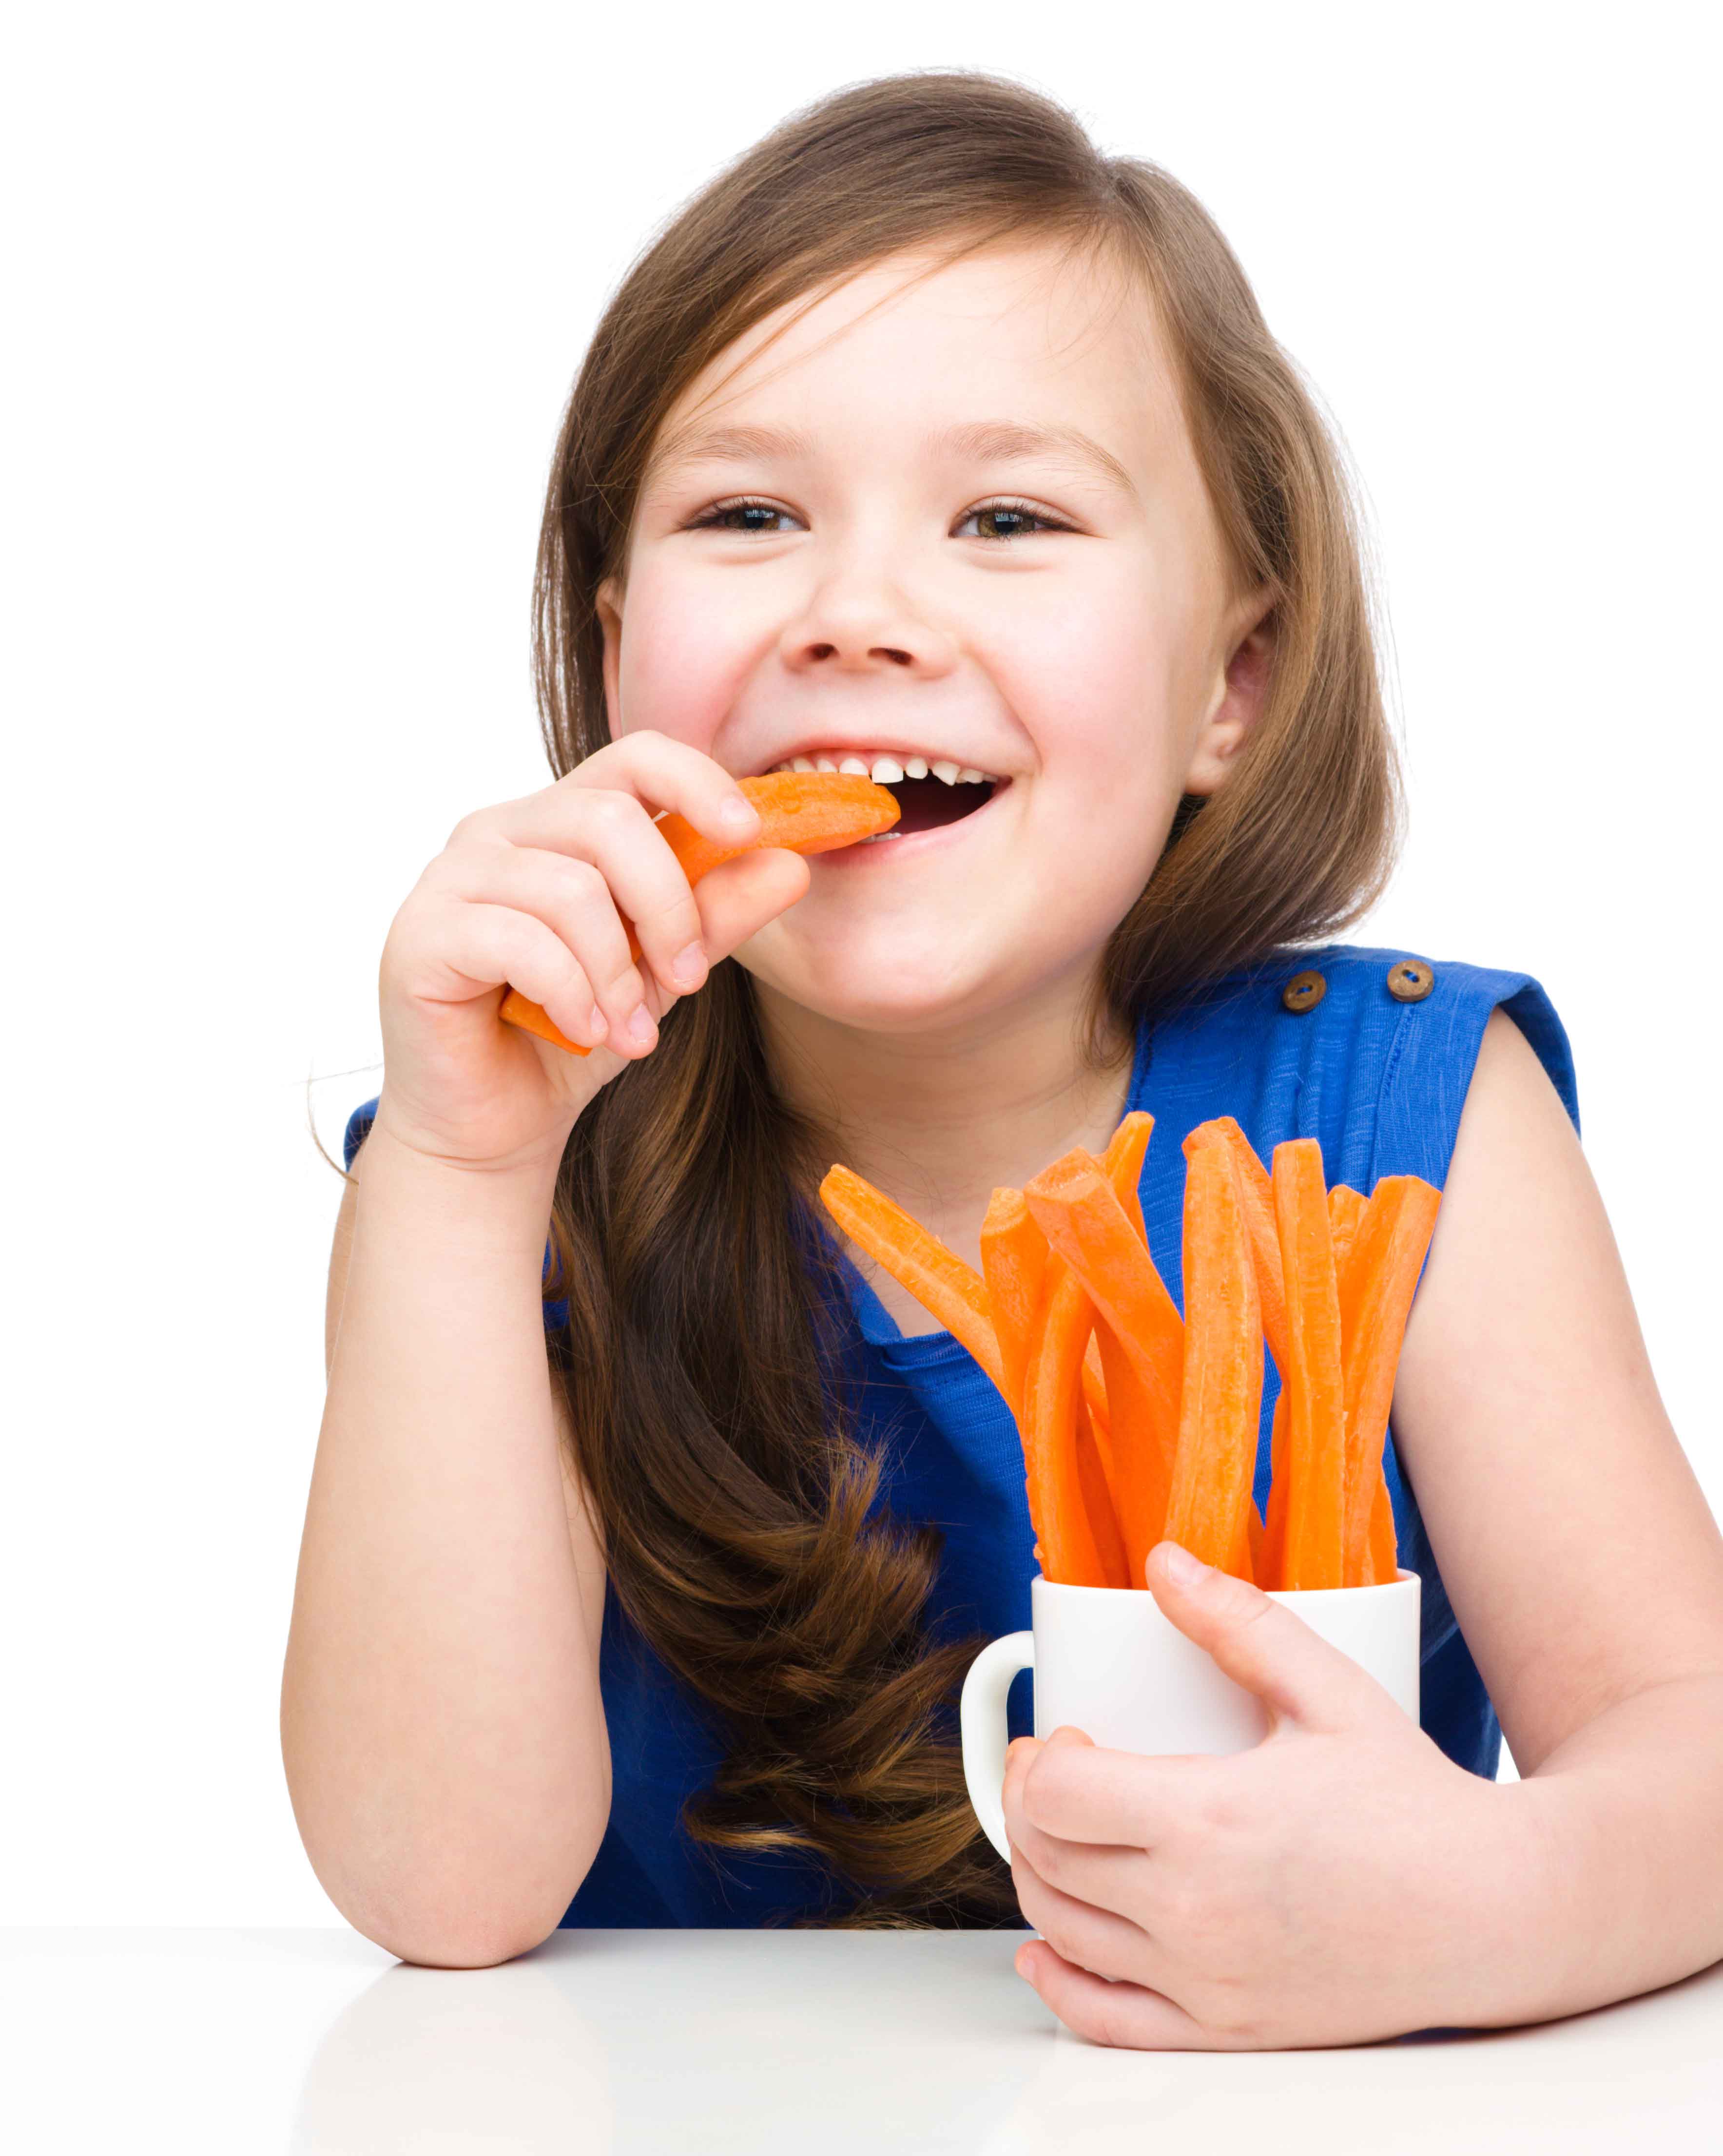 If you cut up cucumbers or carrot sticks in advance, your child is more likely to grab these “pre-made” snacks instead of eating other, unhealthier snacks. Check out our article on snacks for more tips! 